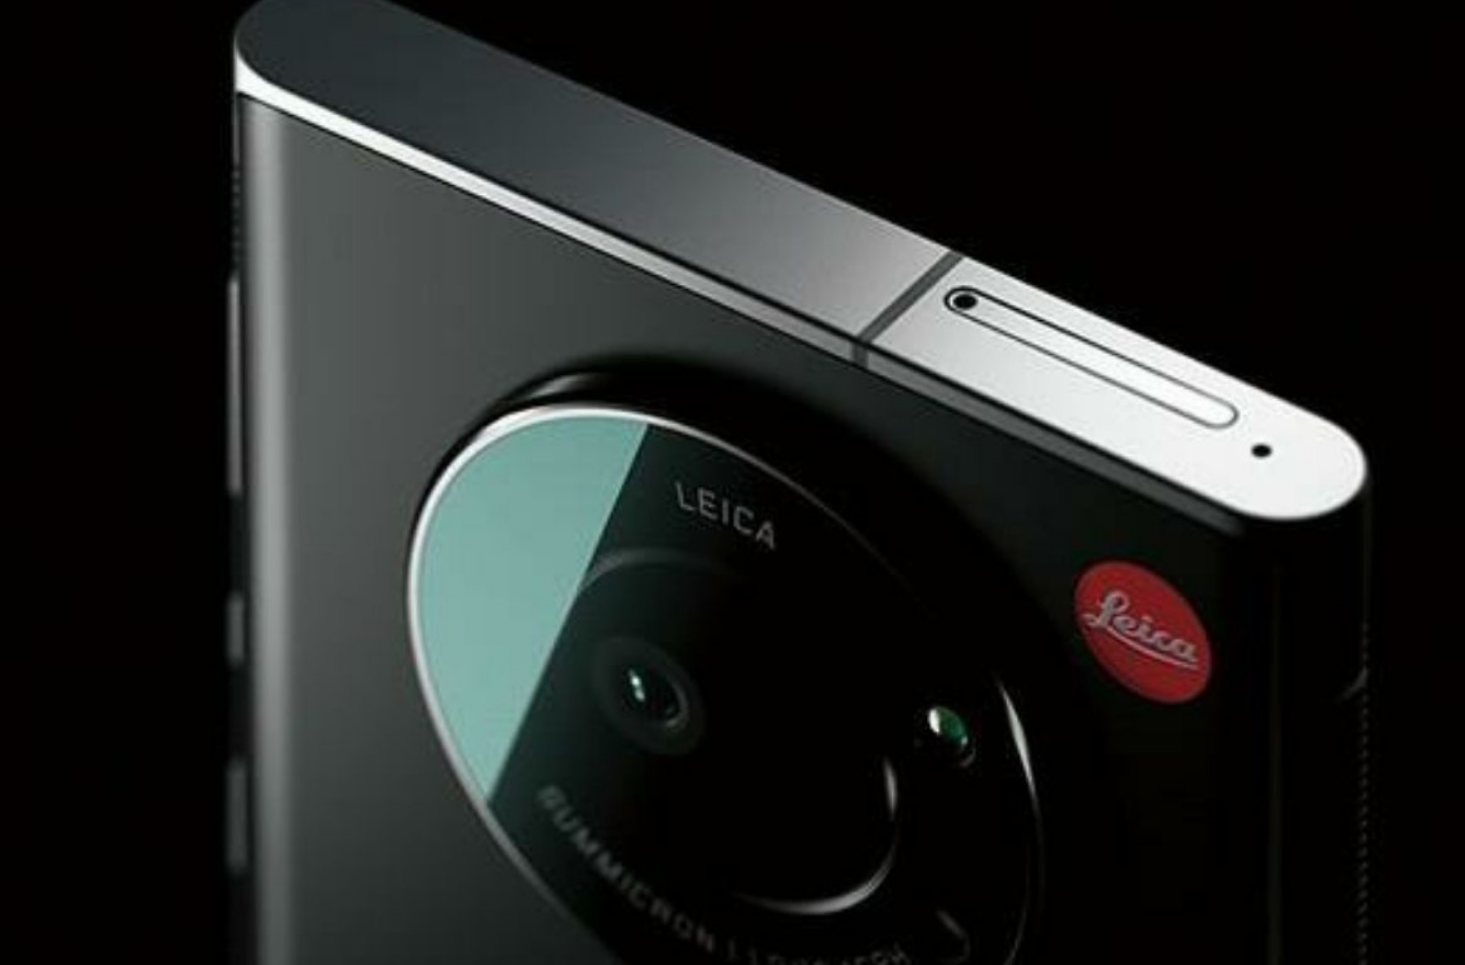 The first smartphone from Leica is already on sale